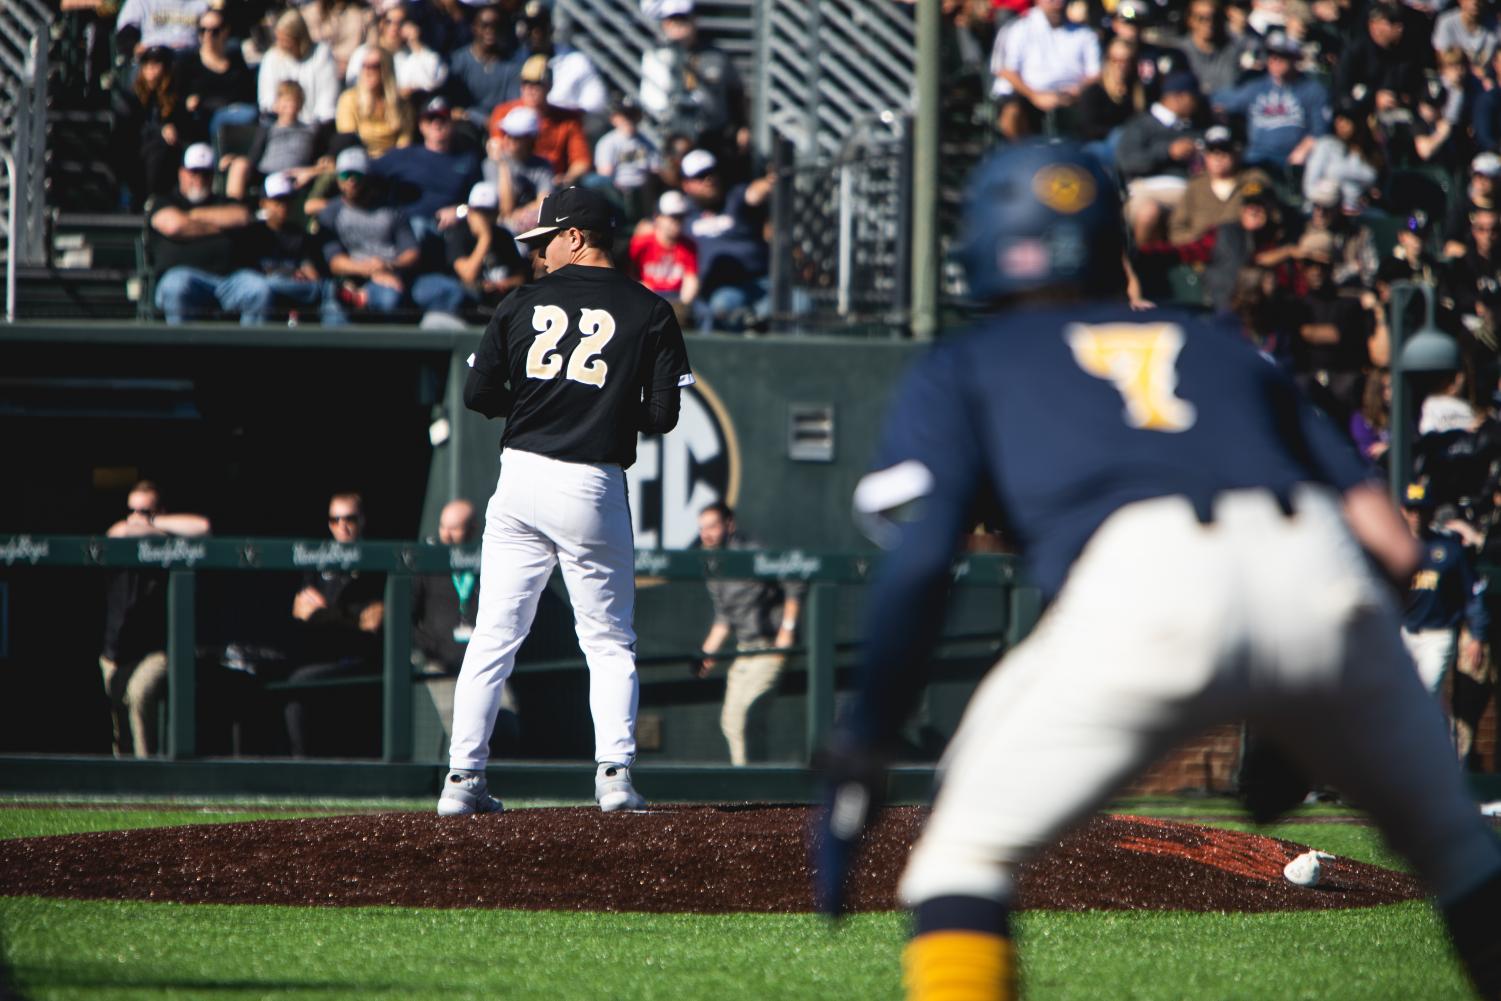 Jack Leiter pitches from the stretch in the first inning of Vanderbilts home exhibition with Michigan.